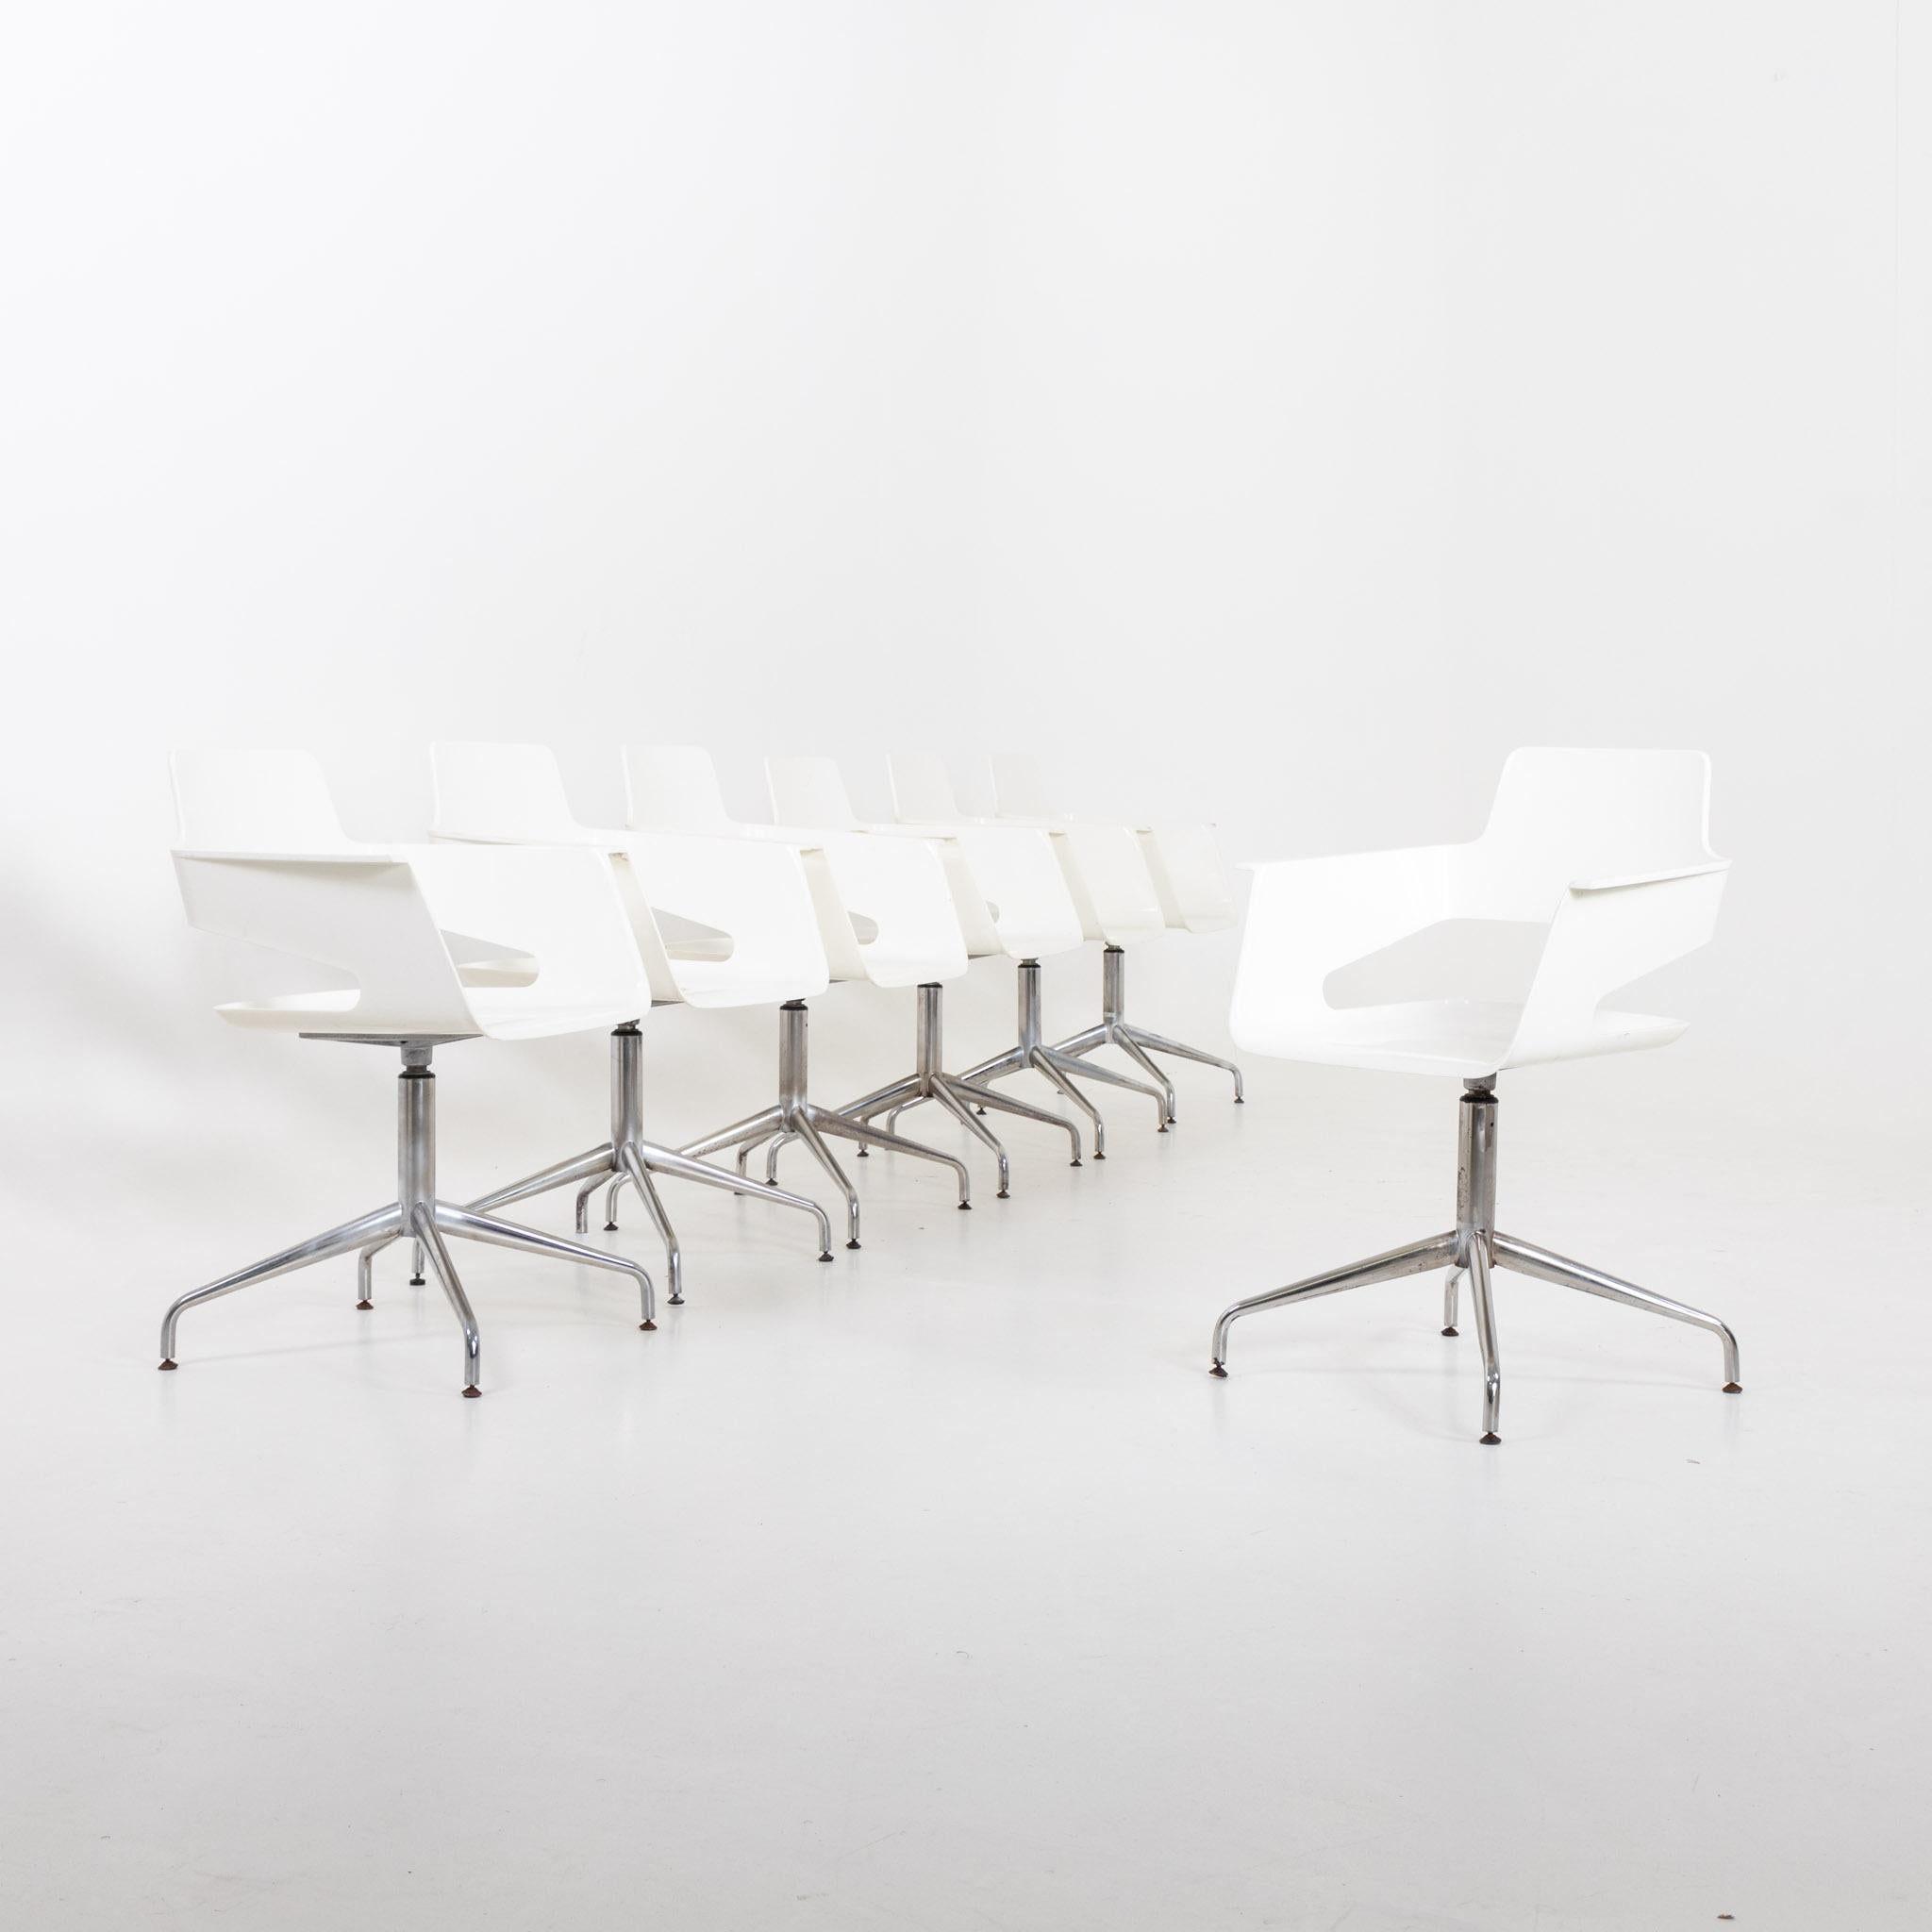 European Set of ten Office Chairs, white and metal, 20th Century For Sale